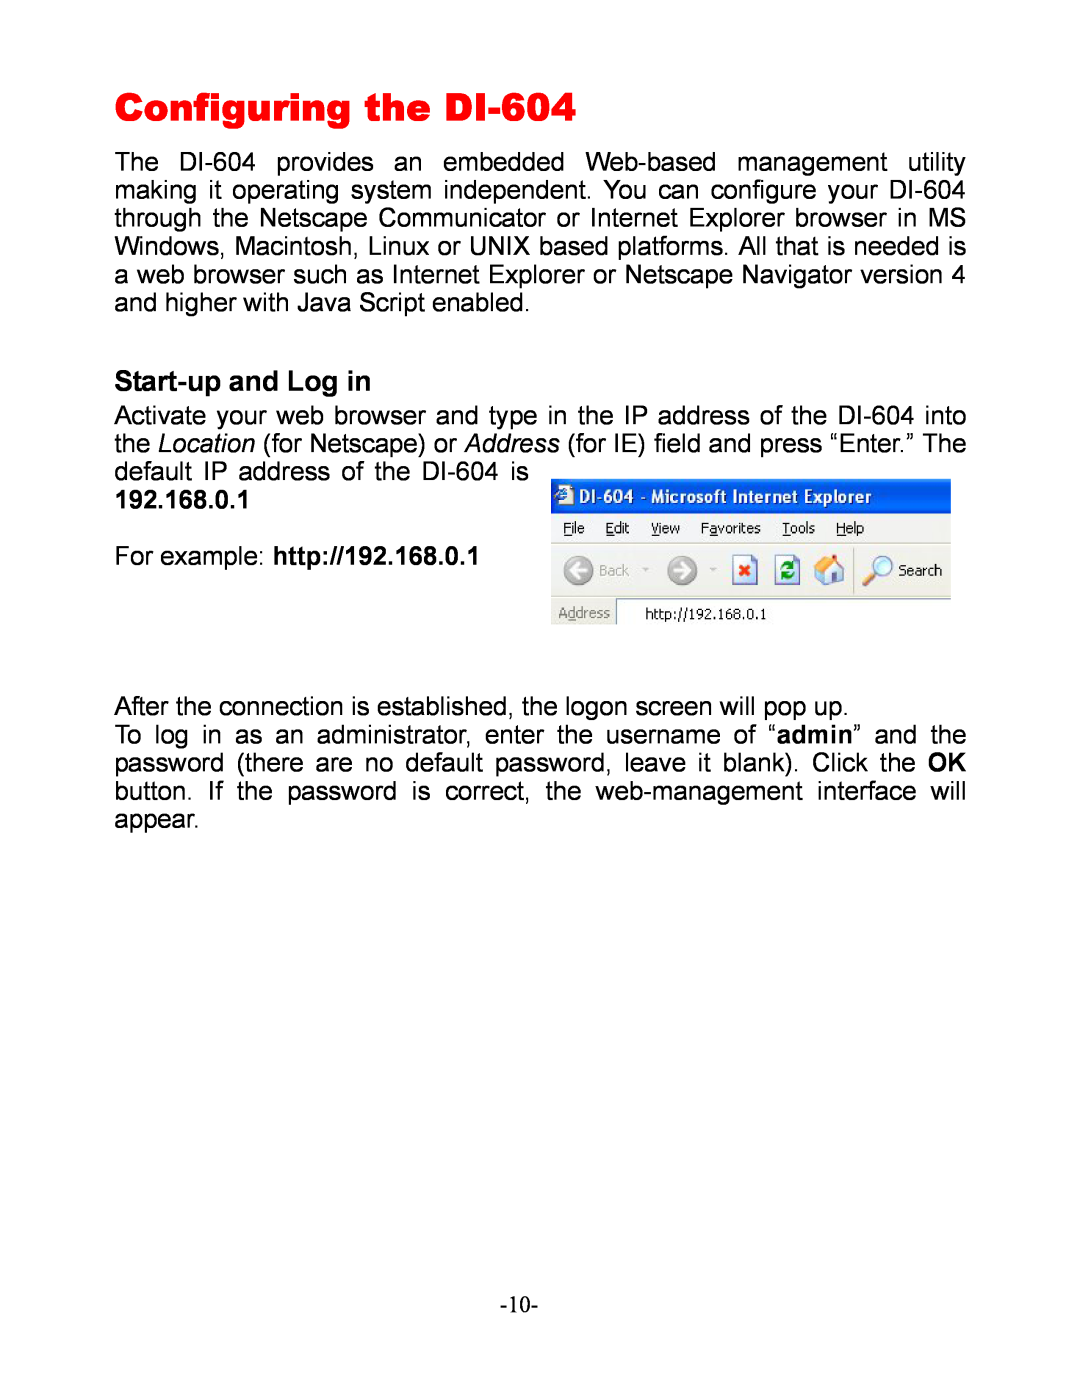 D-Link manual Configuring the DI-604, Start-up and Log in, For example http//192.168.0.1 